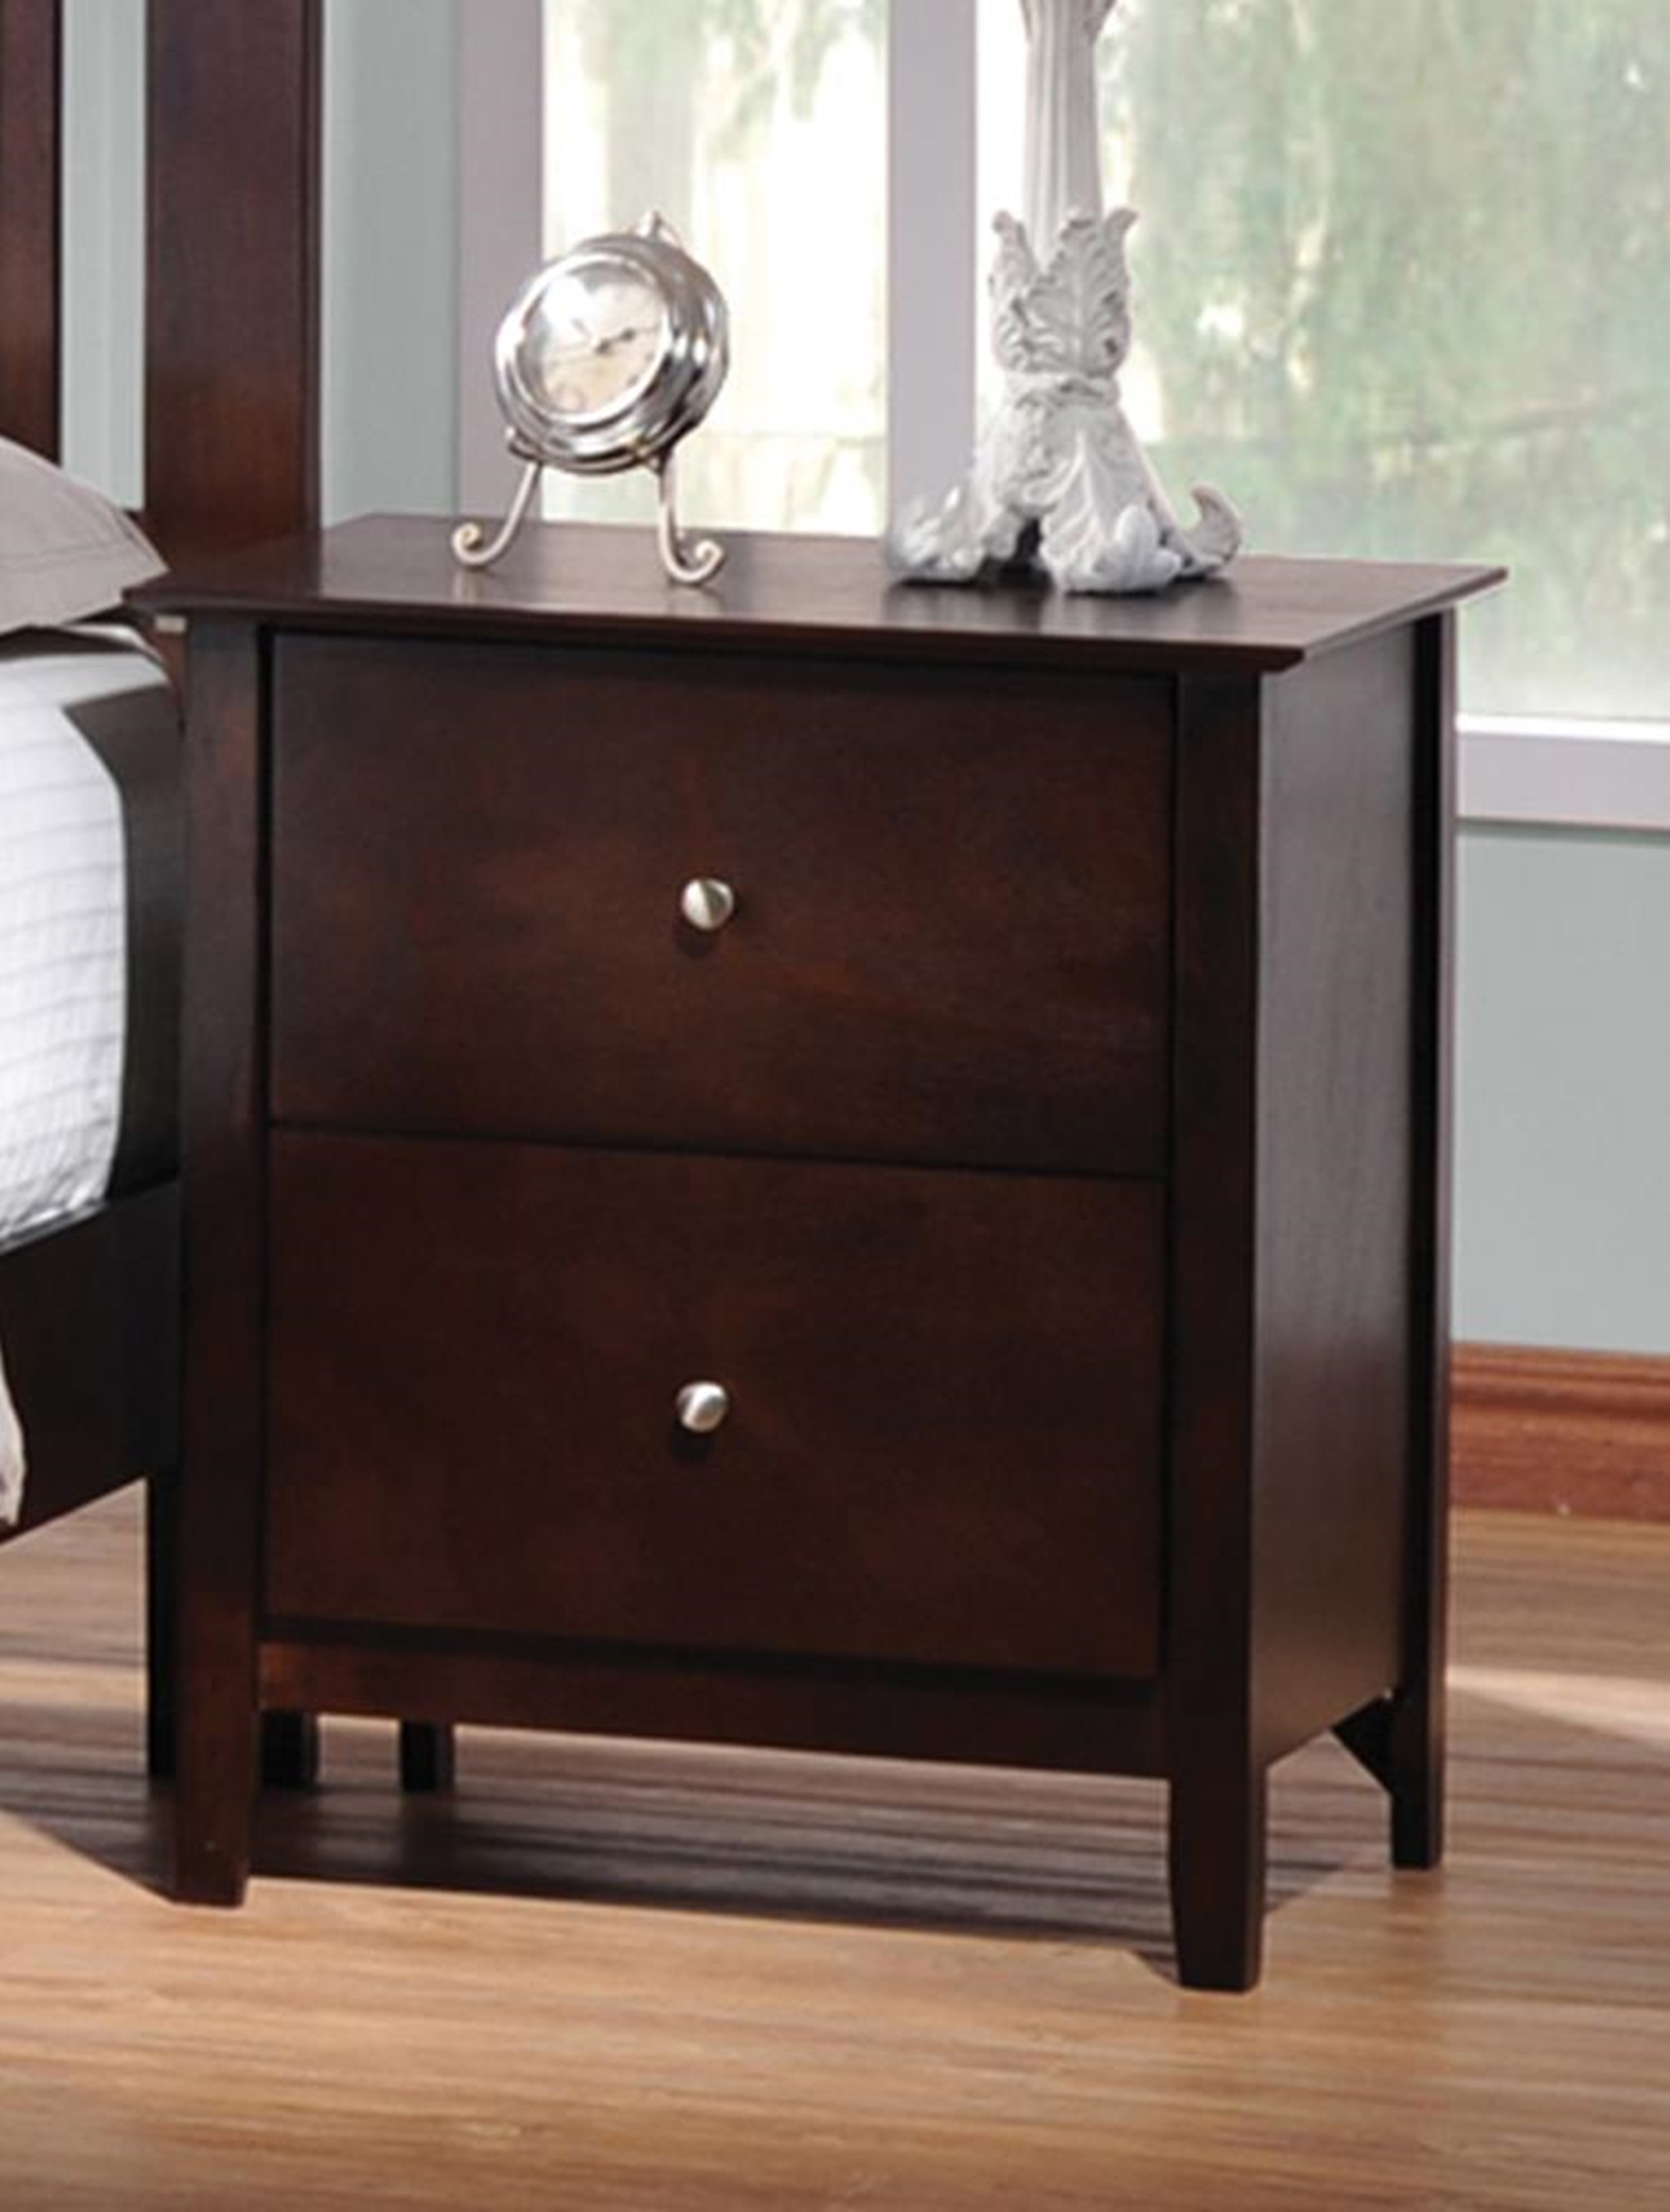 Tia Capp. Two-Drawer Nightstand - Click Image to Close